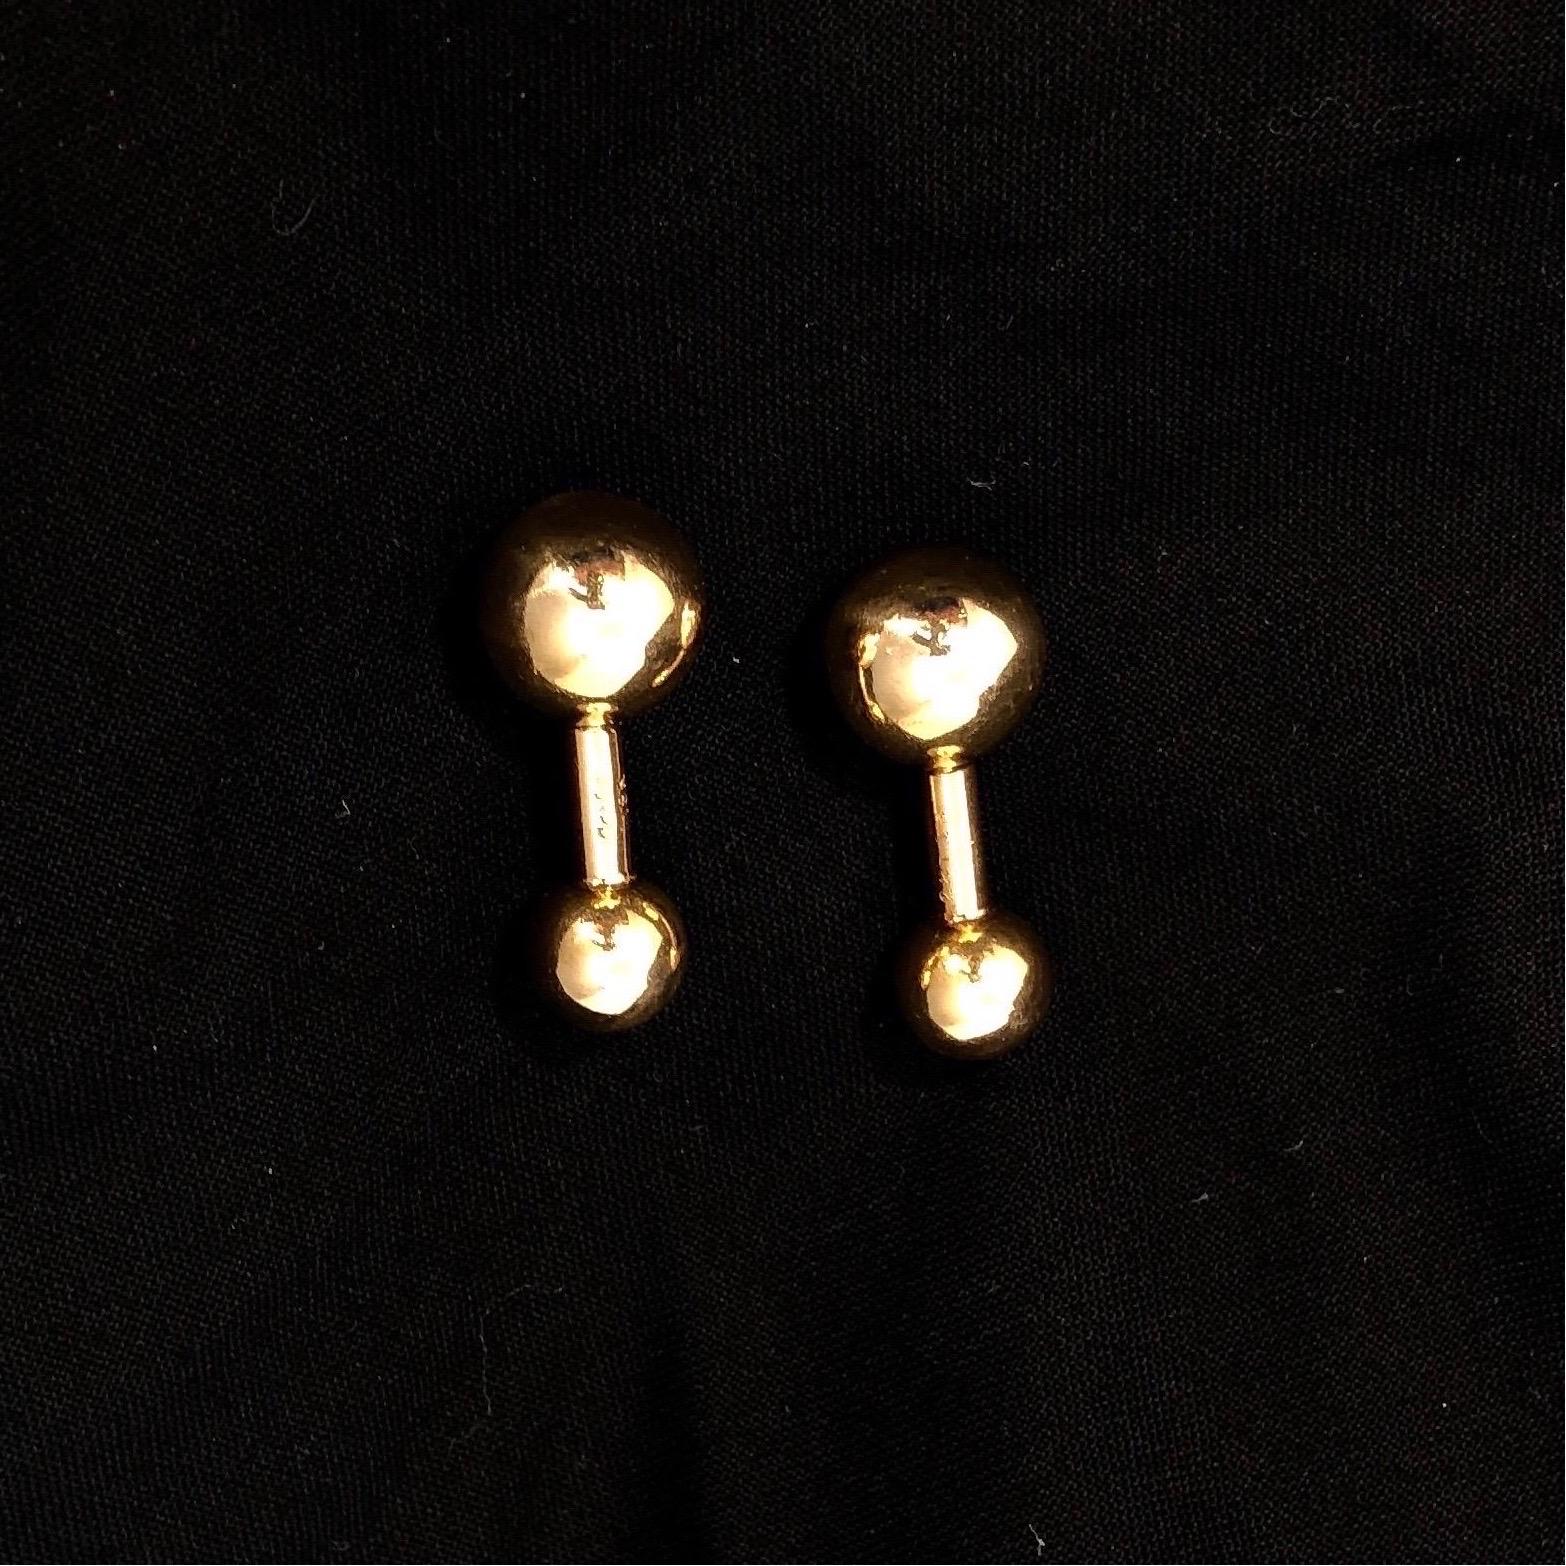 These wonderful 18k yellow gold Cartier stud cuff links were created in the USA. Measuring 12.5mm and 9mm, the orbs are high polish finish and show a rich patina. The total weigh for the set of dumbbells is 11.3 grams and each is signed Cartier 18k